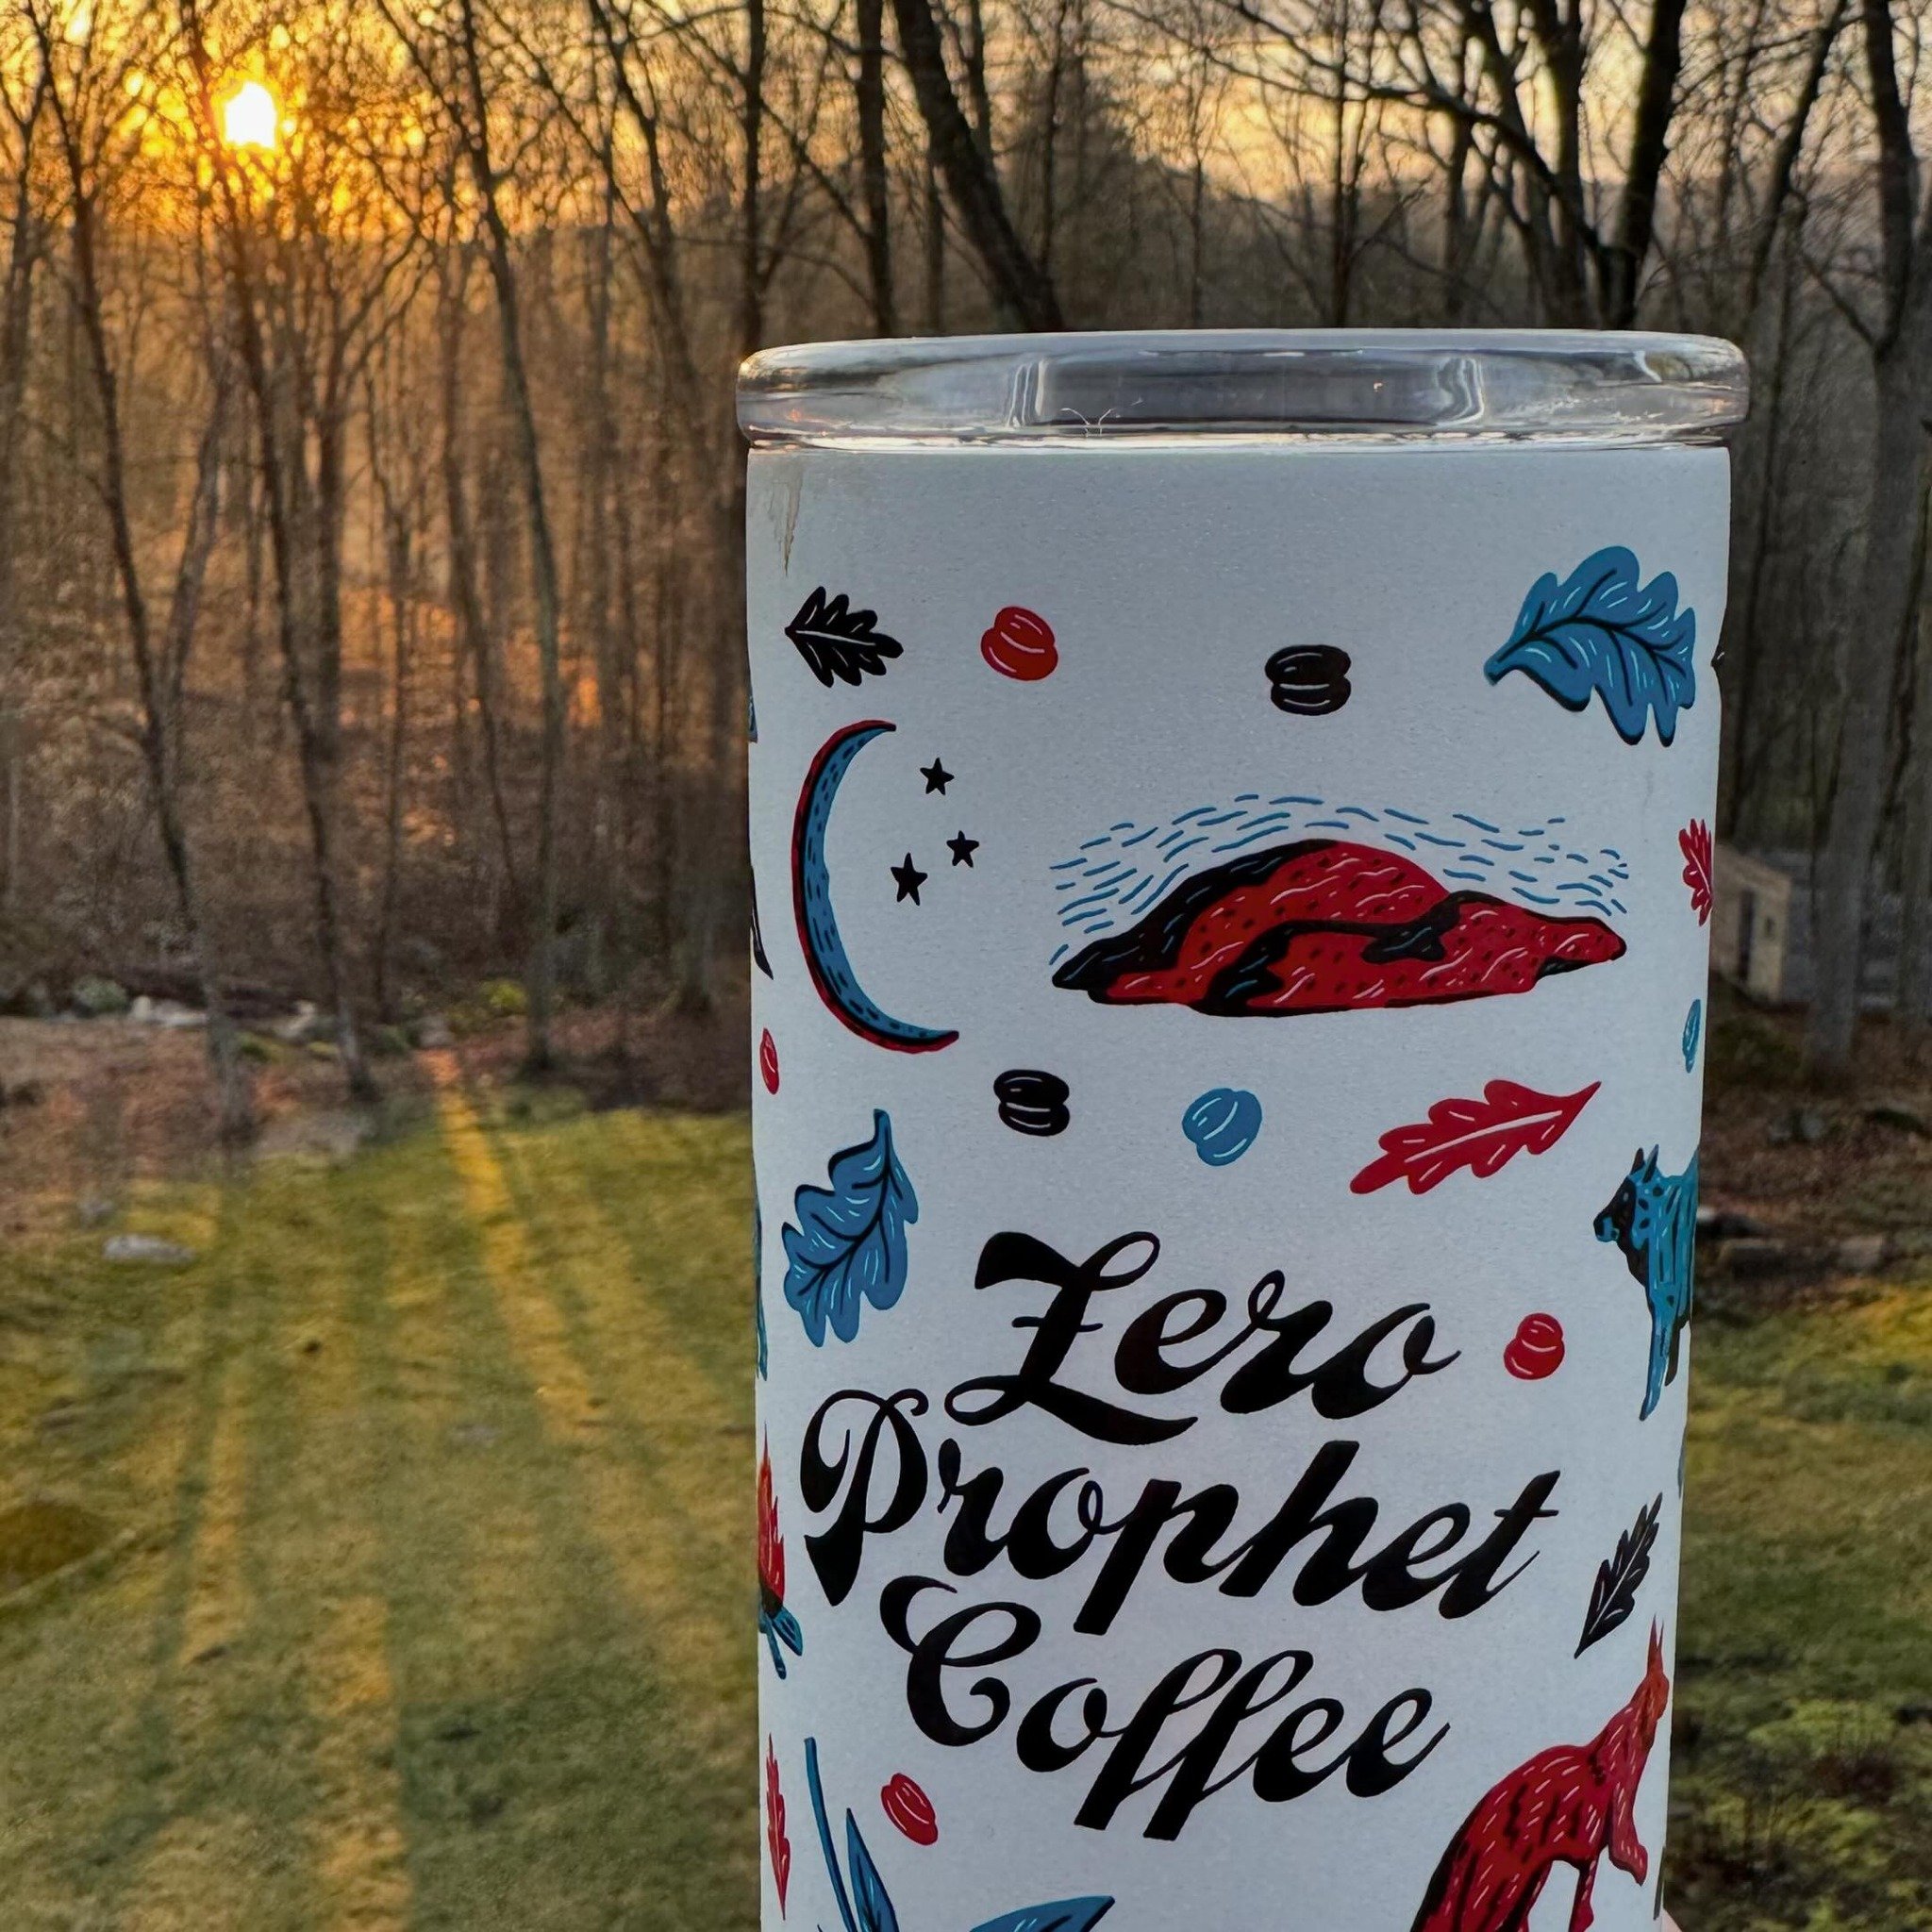 Thanks to @adam.d.riess for this sparkling photo of our new travel thermos! Check it out on our website or at @washingtonfood_market (stay posted for other retail locations). #coffeeonthego #coffeethermos #travelcoffee #coffeetogo